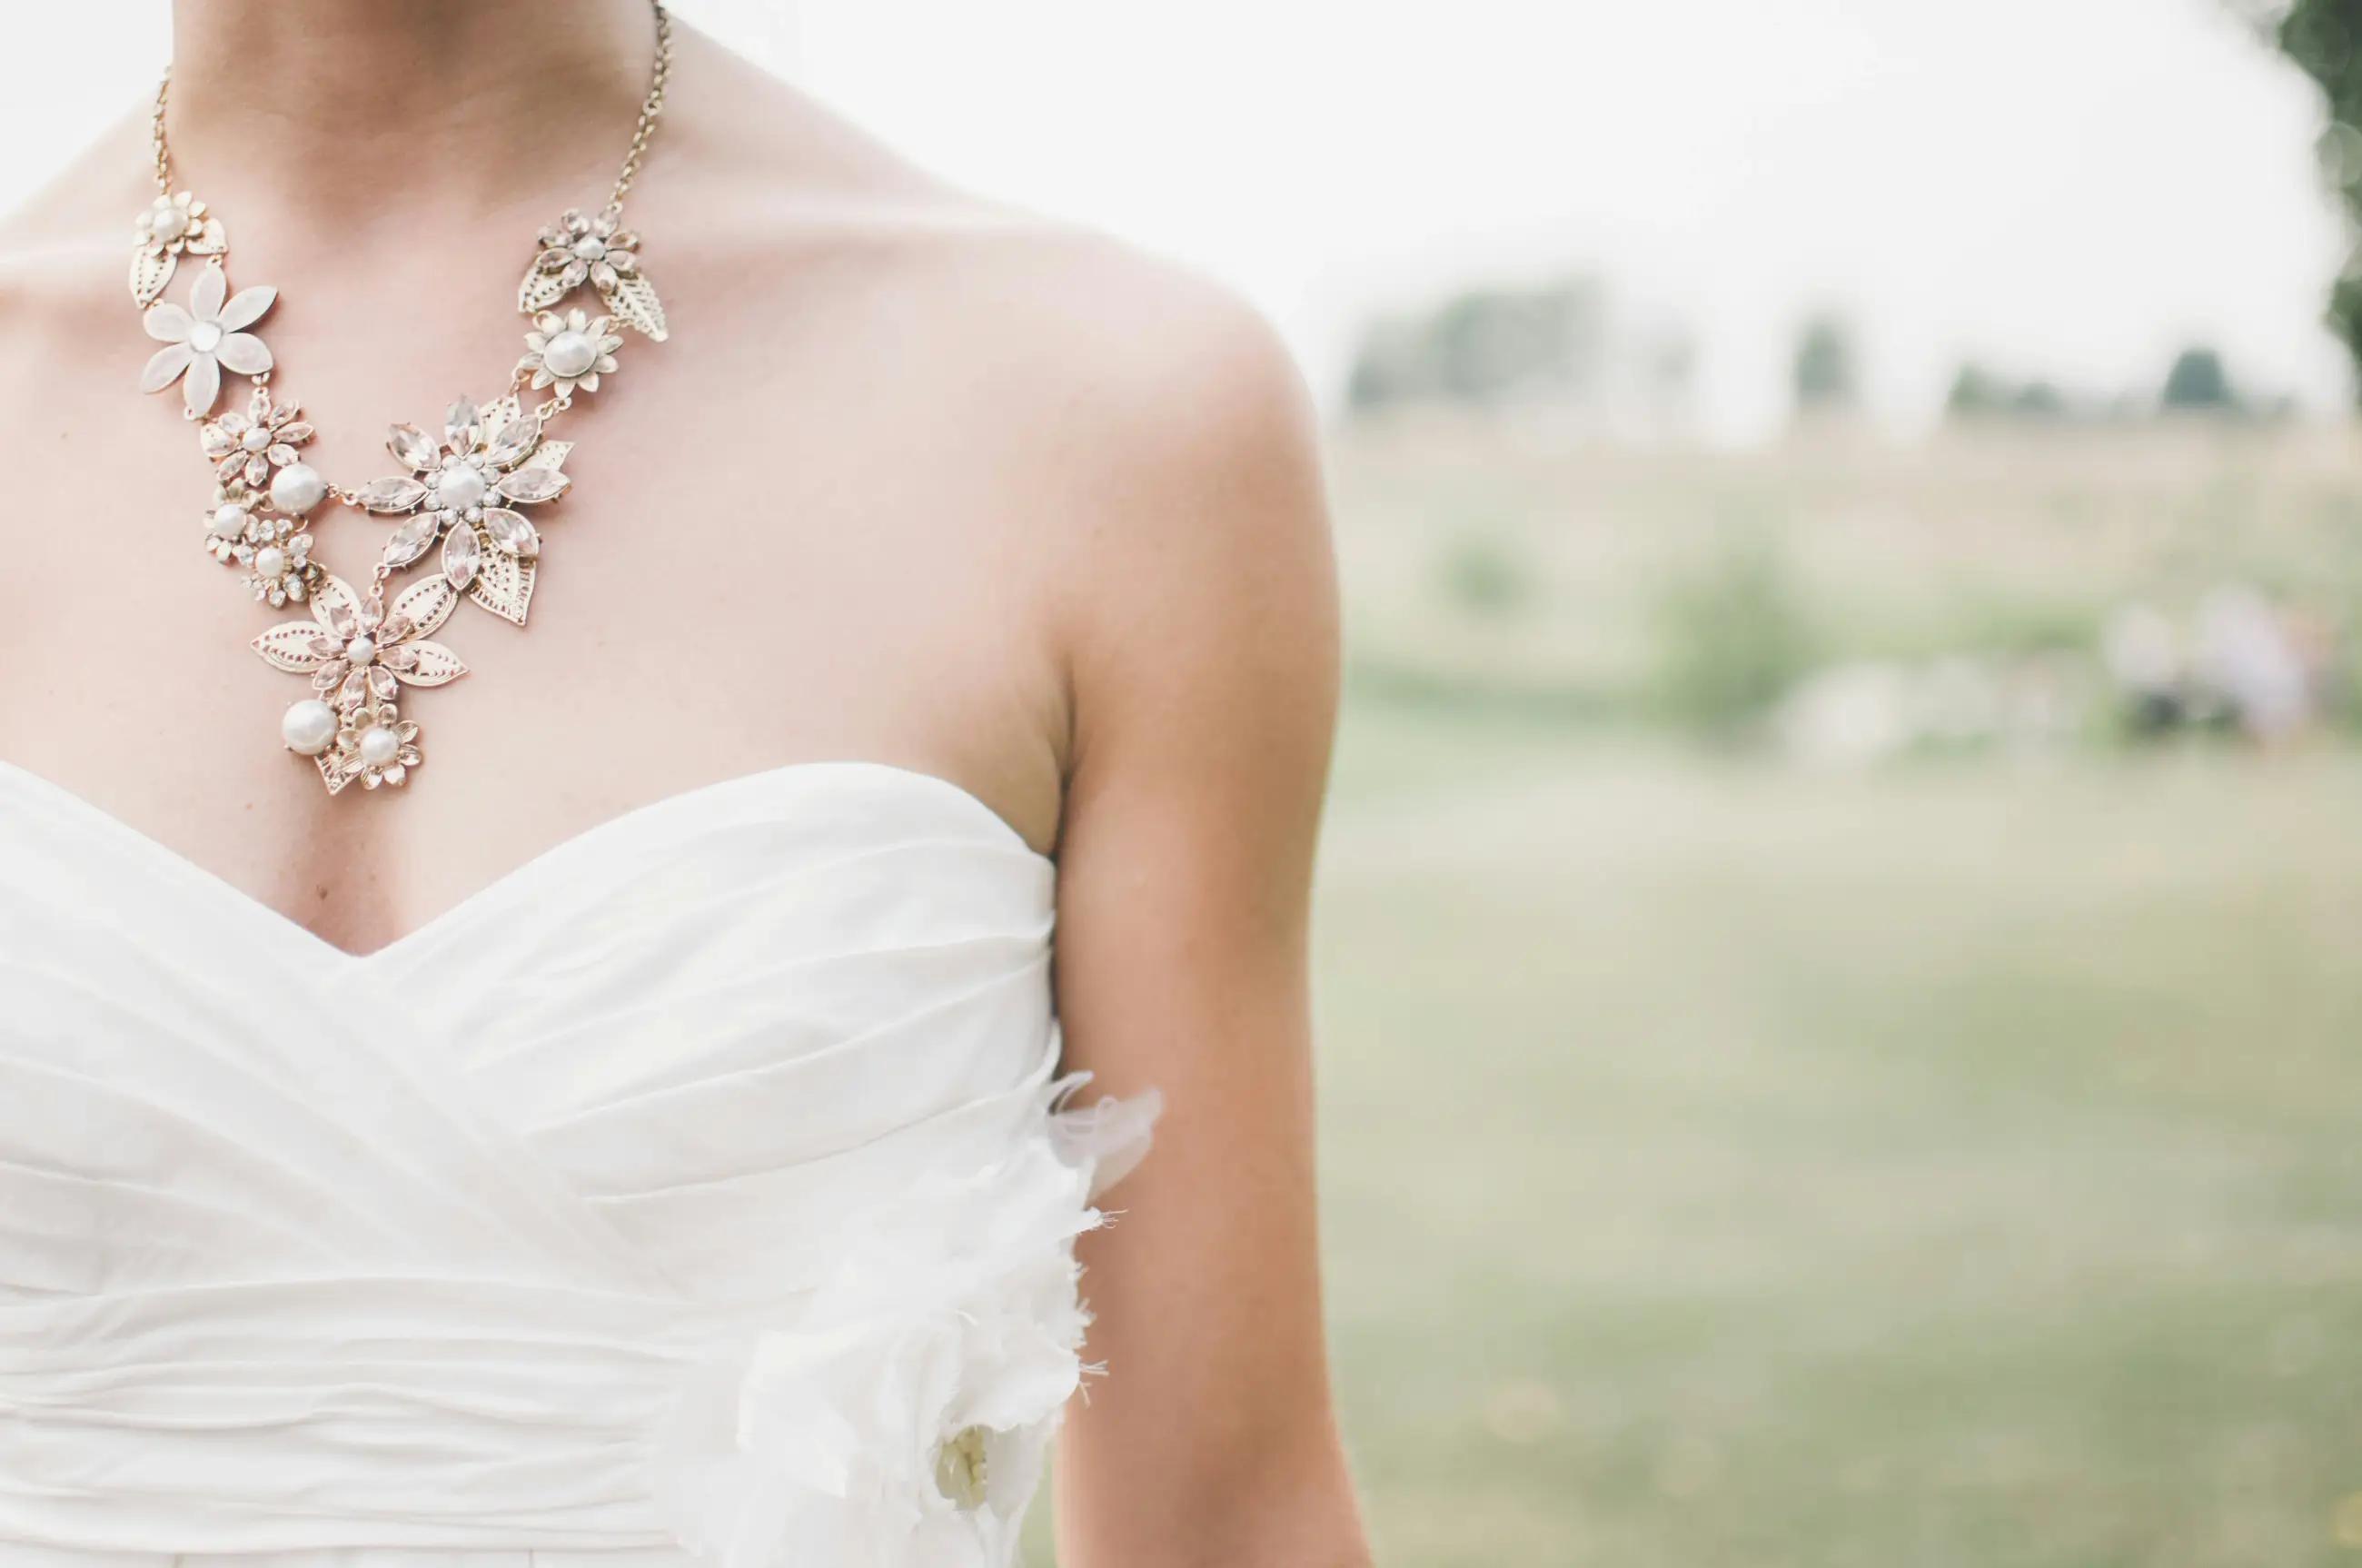 Should you wear a necklace on wedding day? Image